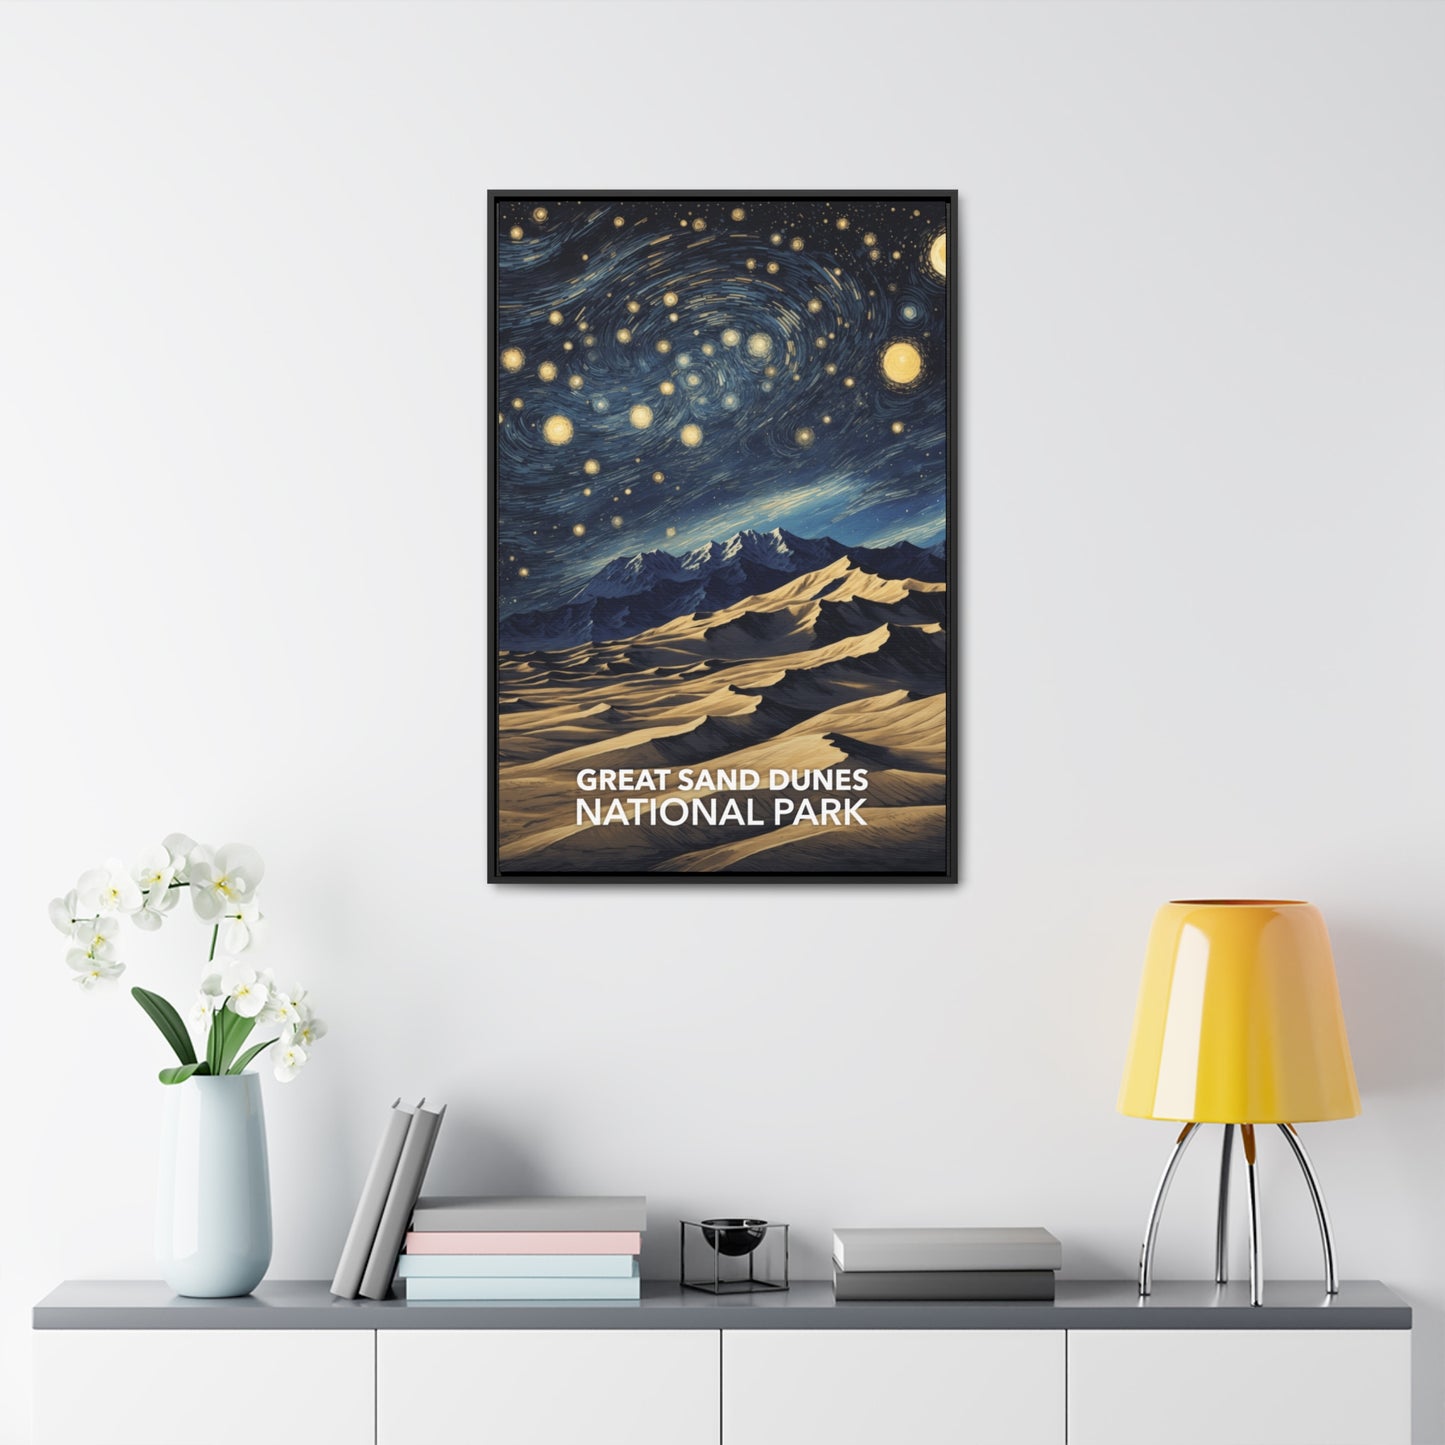 Great Sand Dunes National Park Framed Canvas - The Starry Night